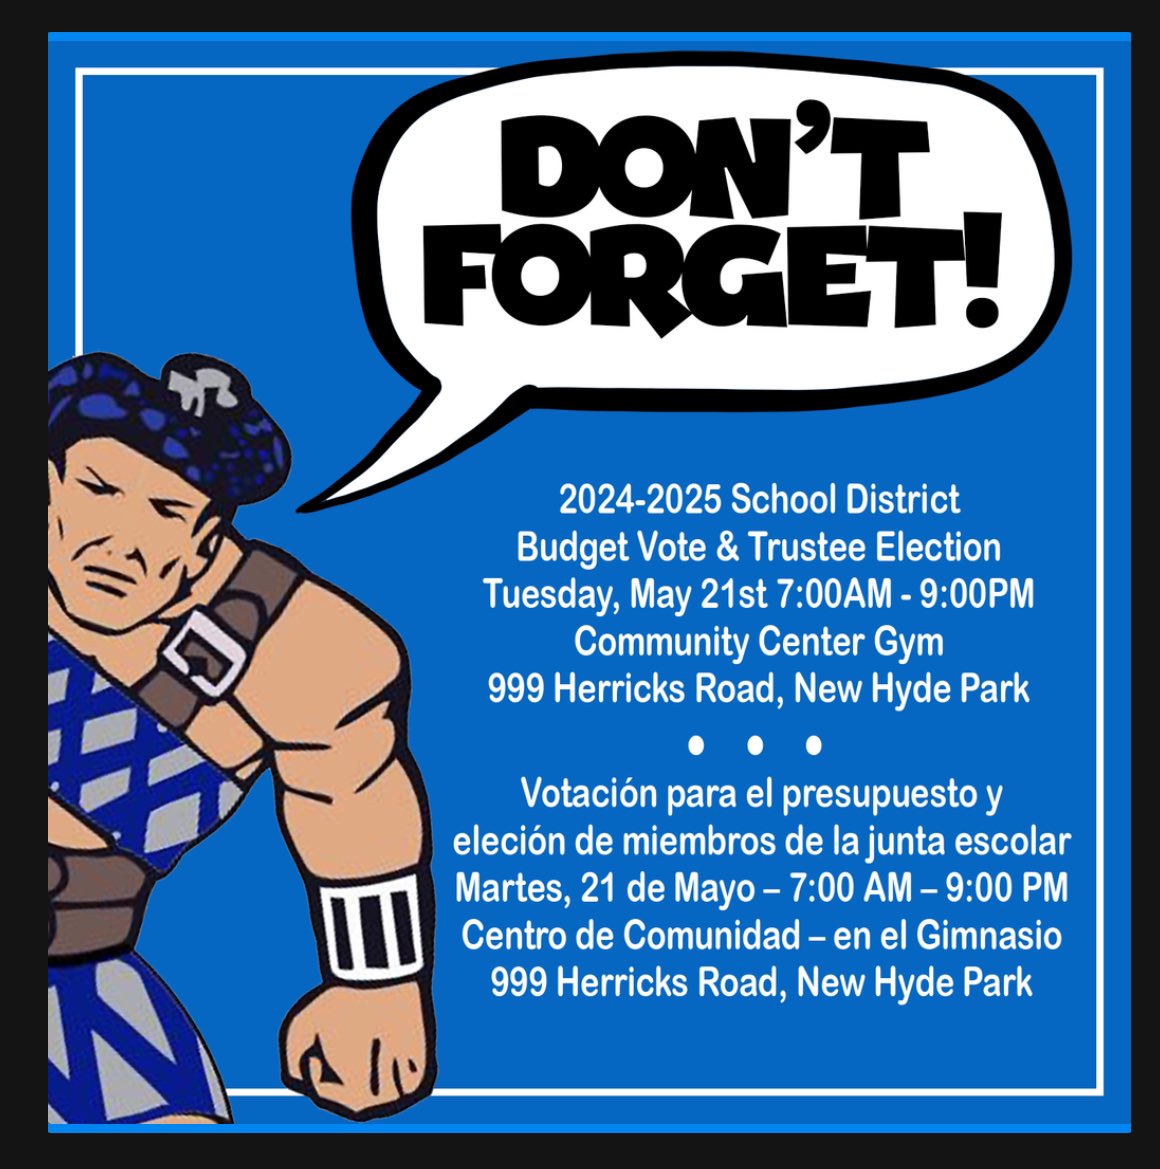 Tomorrow (5/21) is Budget Vote & Board Trustee Election Day in @HerricksSchools! Don’t forget to exercise your right to vote between 7am - 9pm at the Community Center Gym! #WeAreHerricks